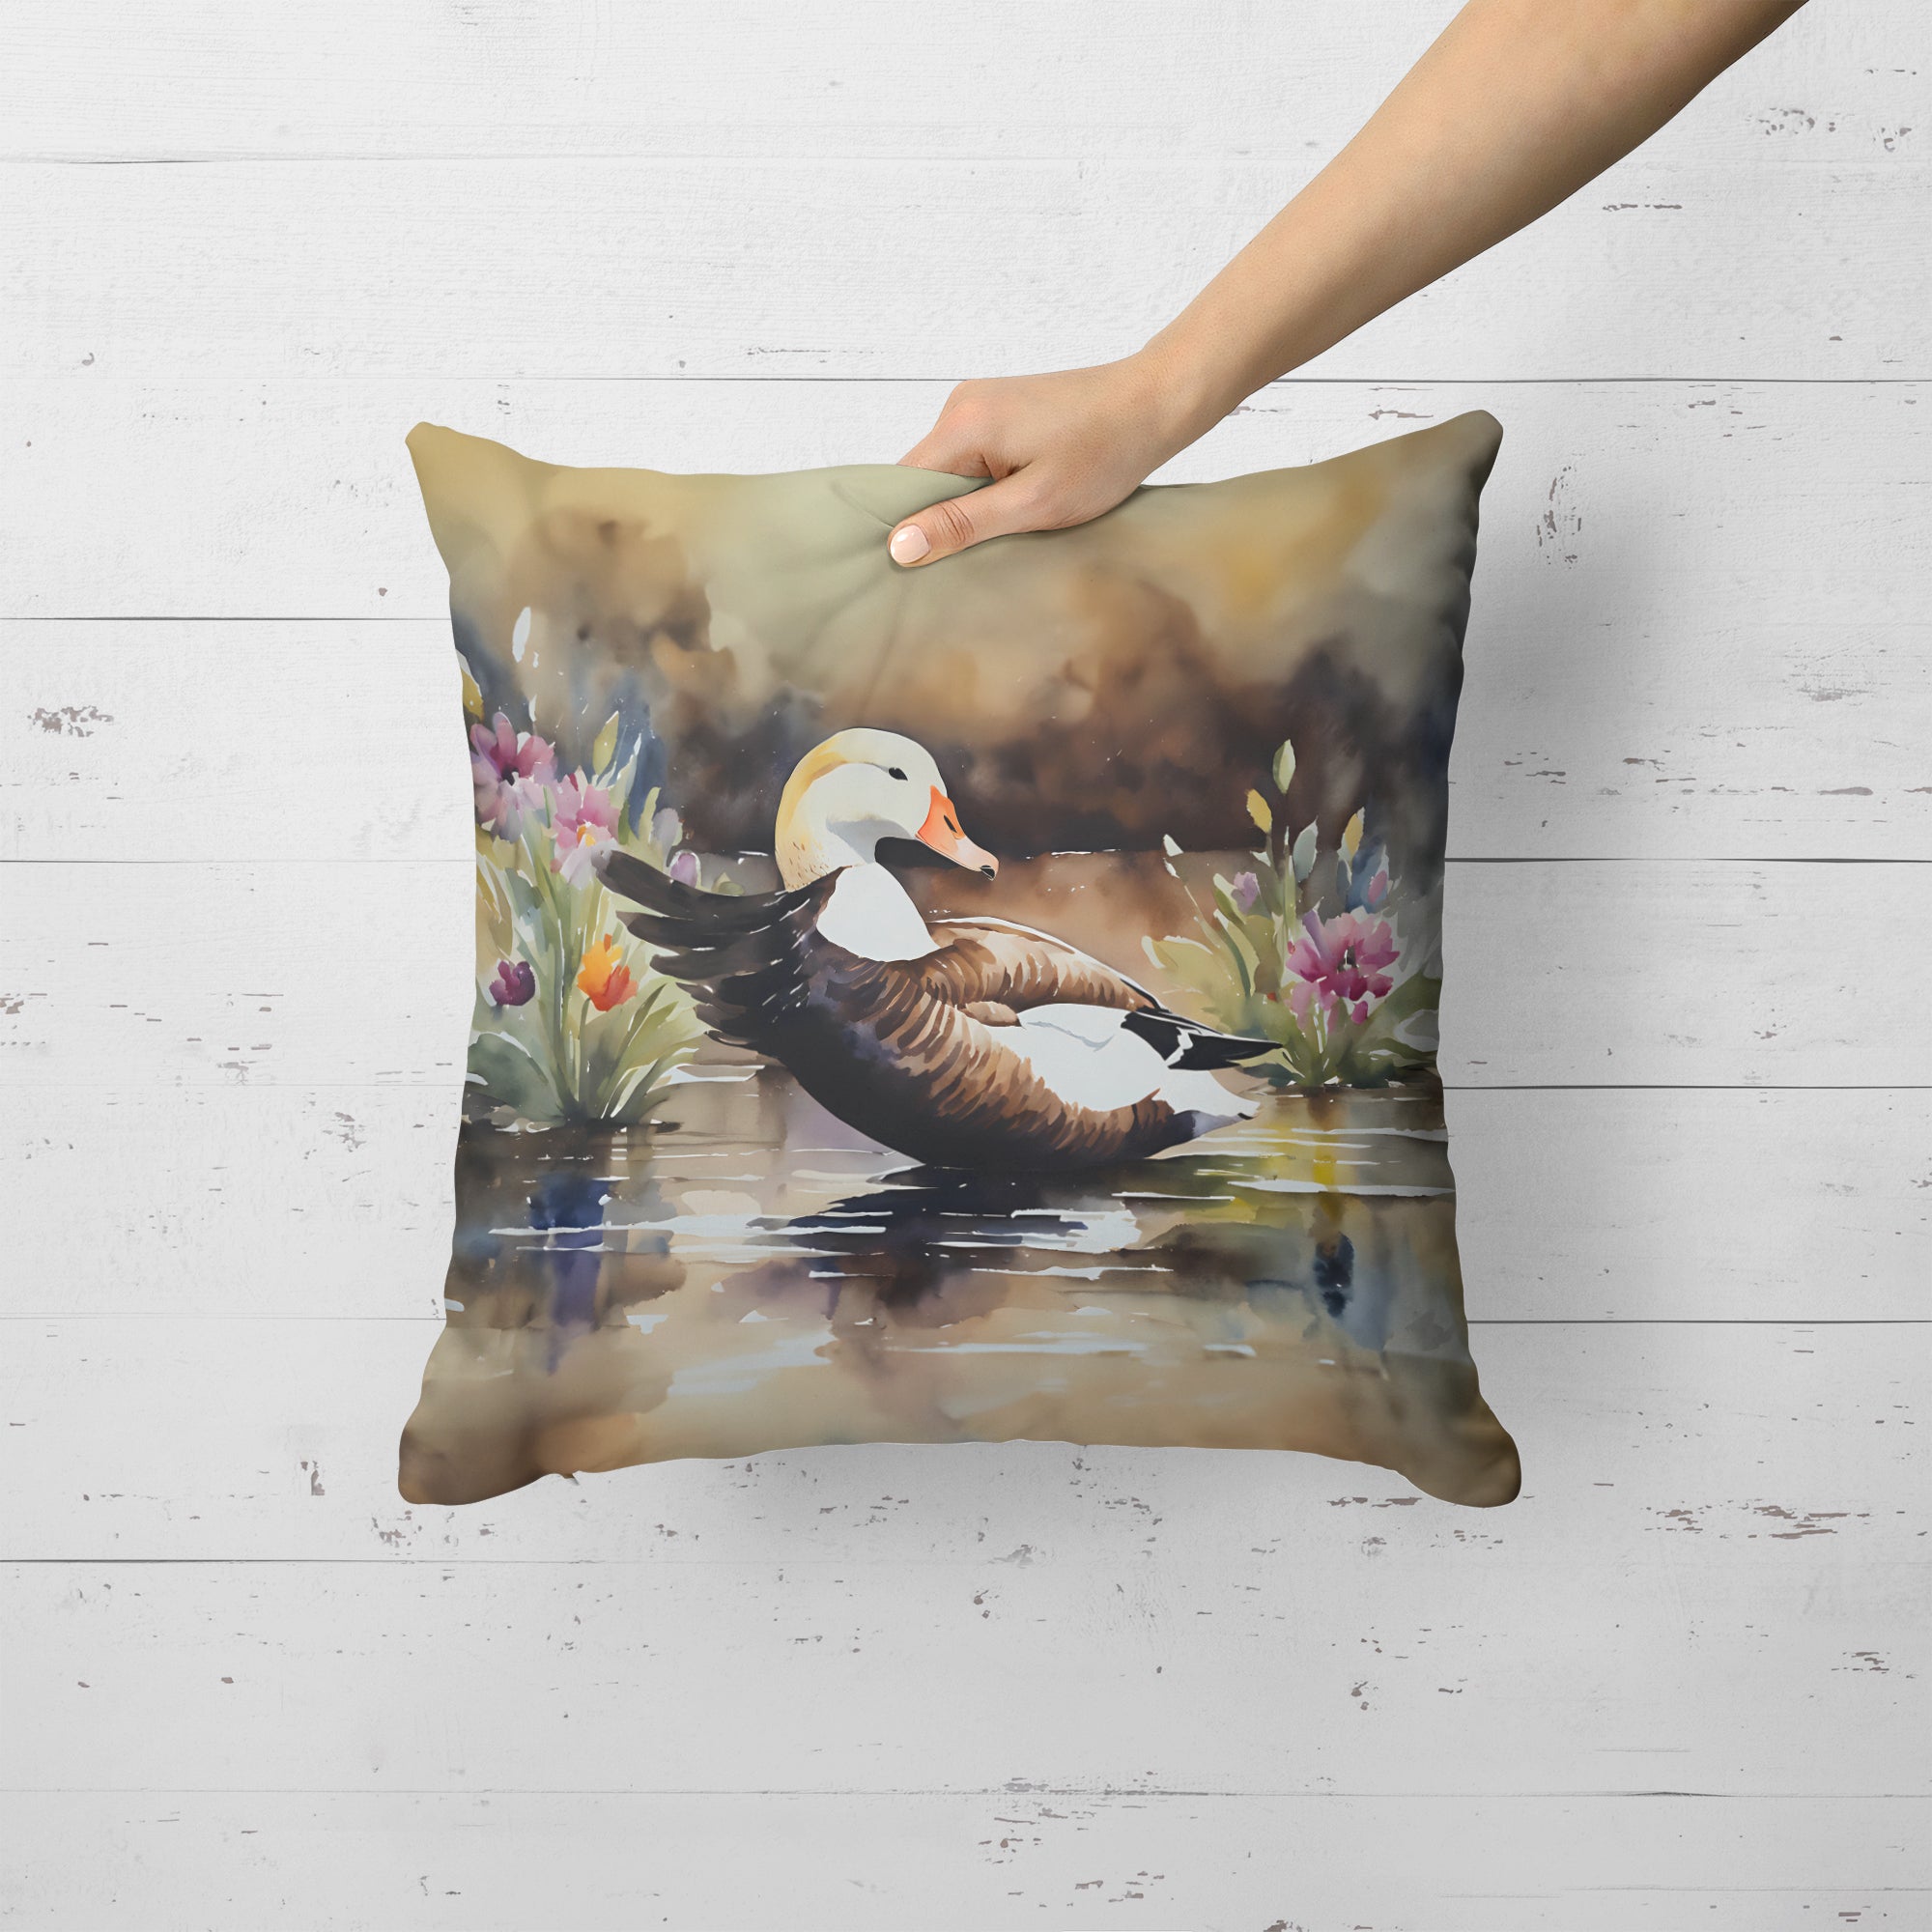 Buy this Common Eider Duck Throw Pillow